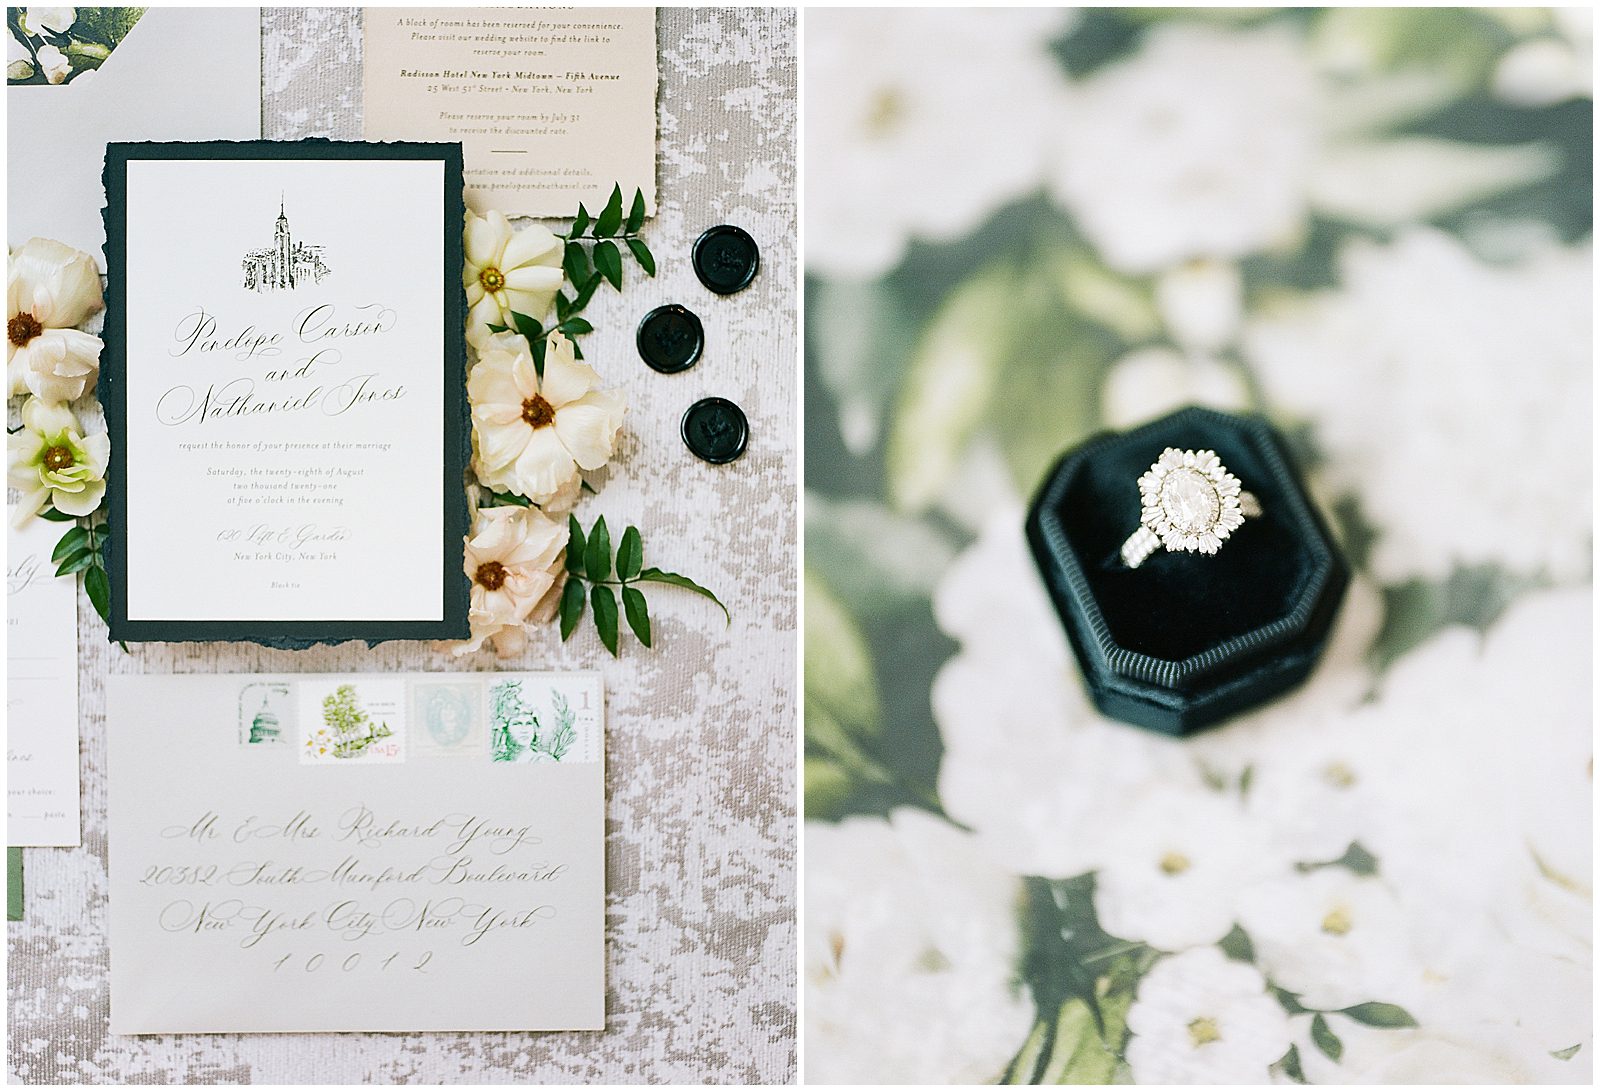 New York City Wedding Venue Invitation Suite and Ring in Ring Box Photos